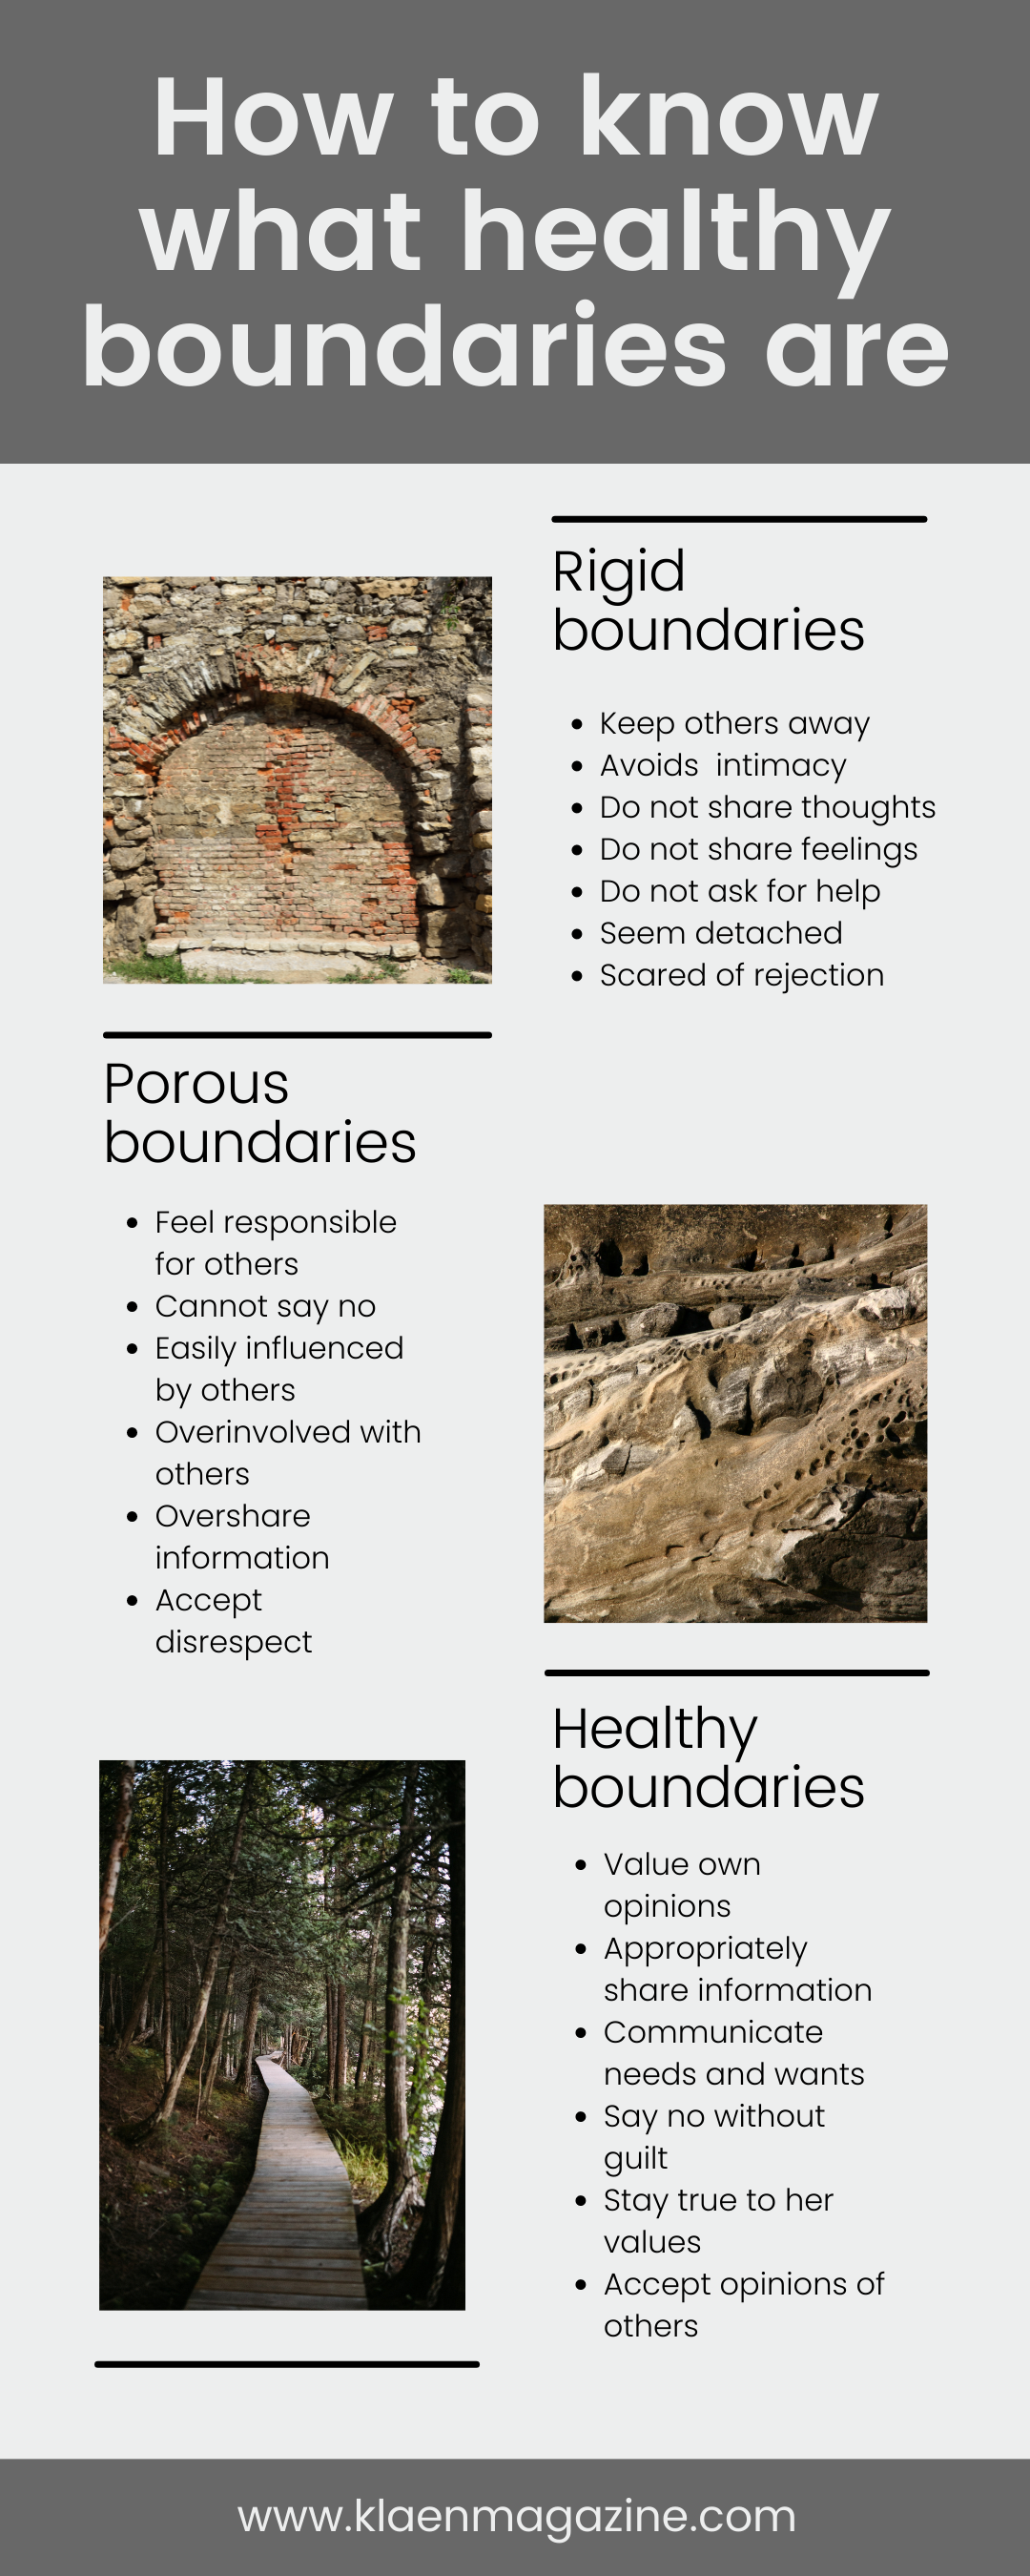 How to know what healthy boundaries are